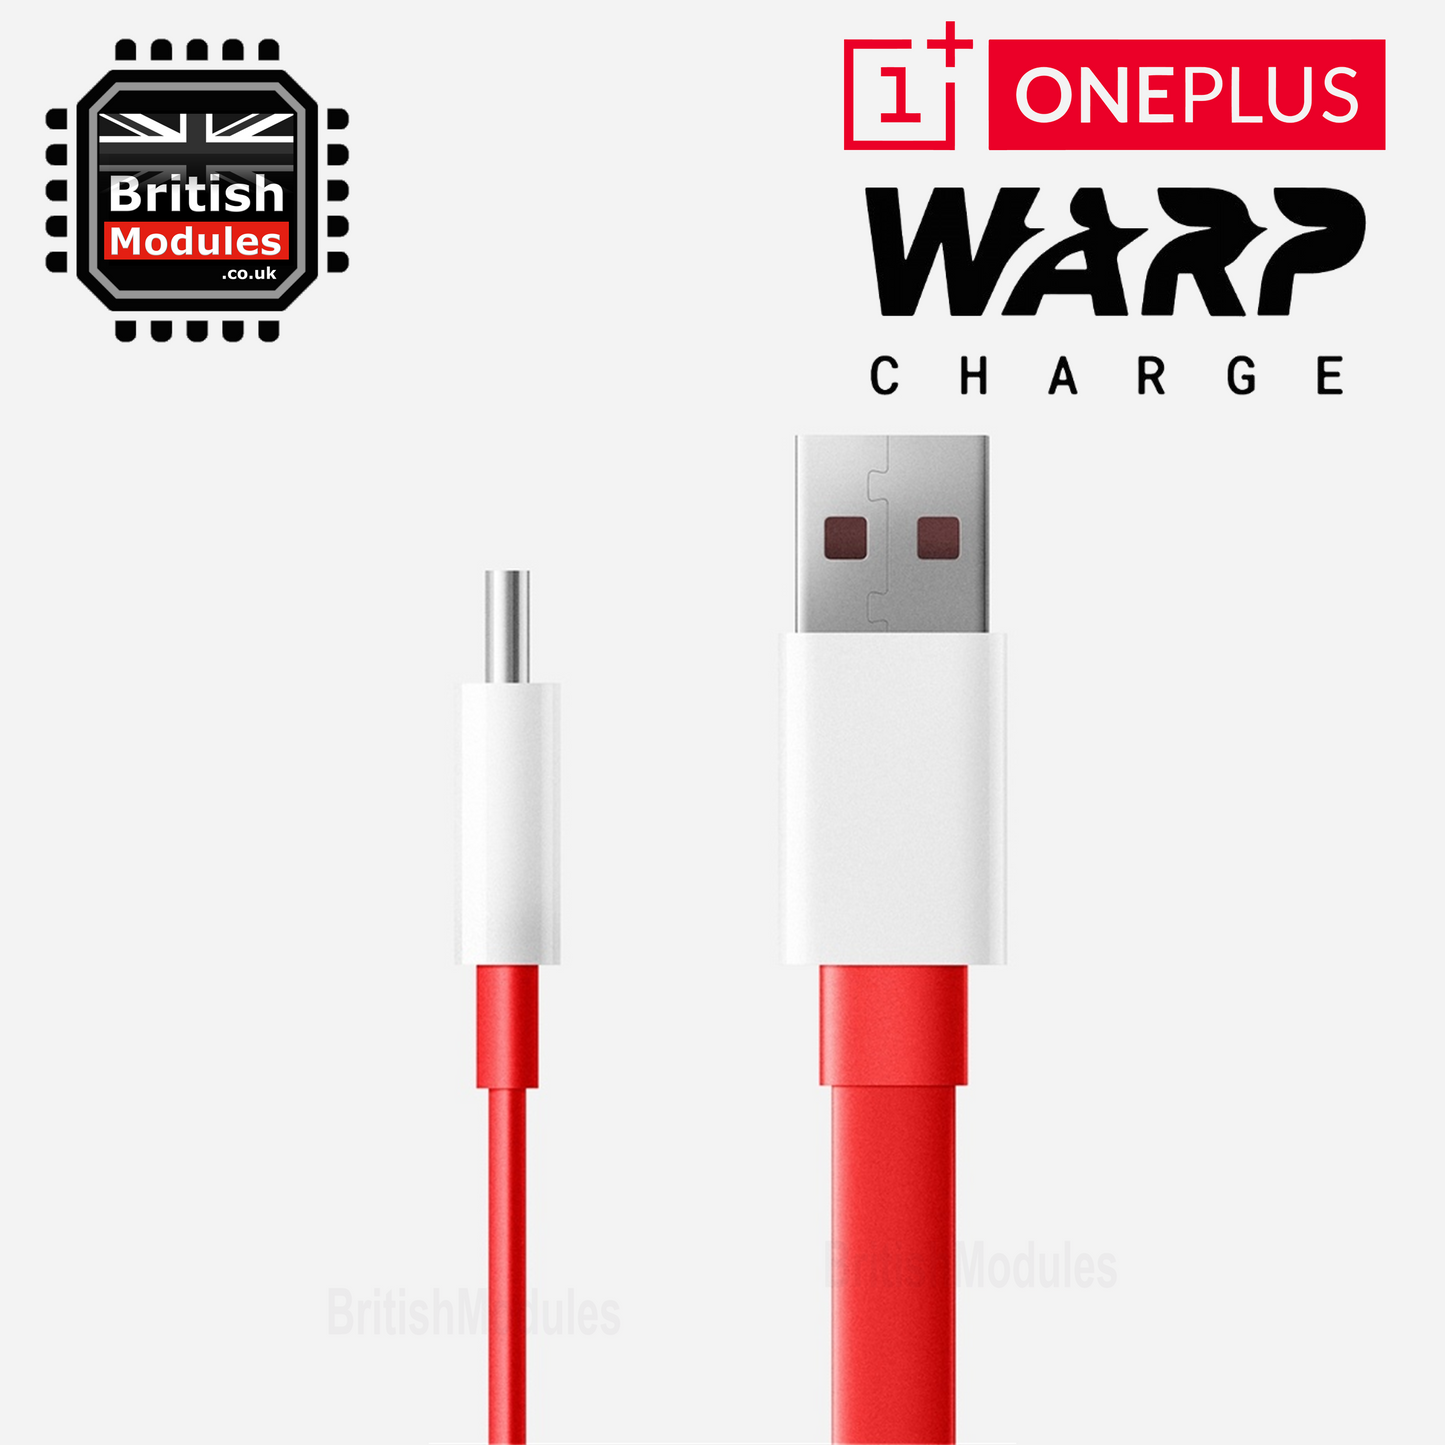 2M OnePlus SUPERVOOC / Warp Charge Type-C Cable 65W 6.5A Fast Charging 6 6T 7 7T 8 9 Pro